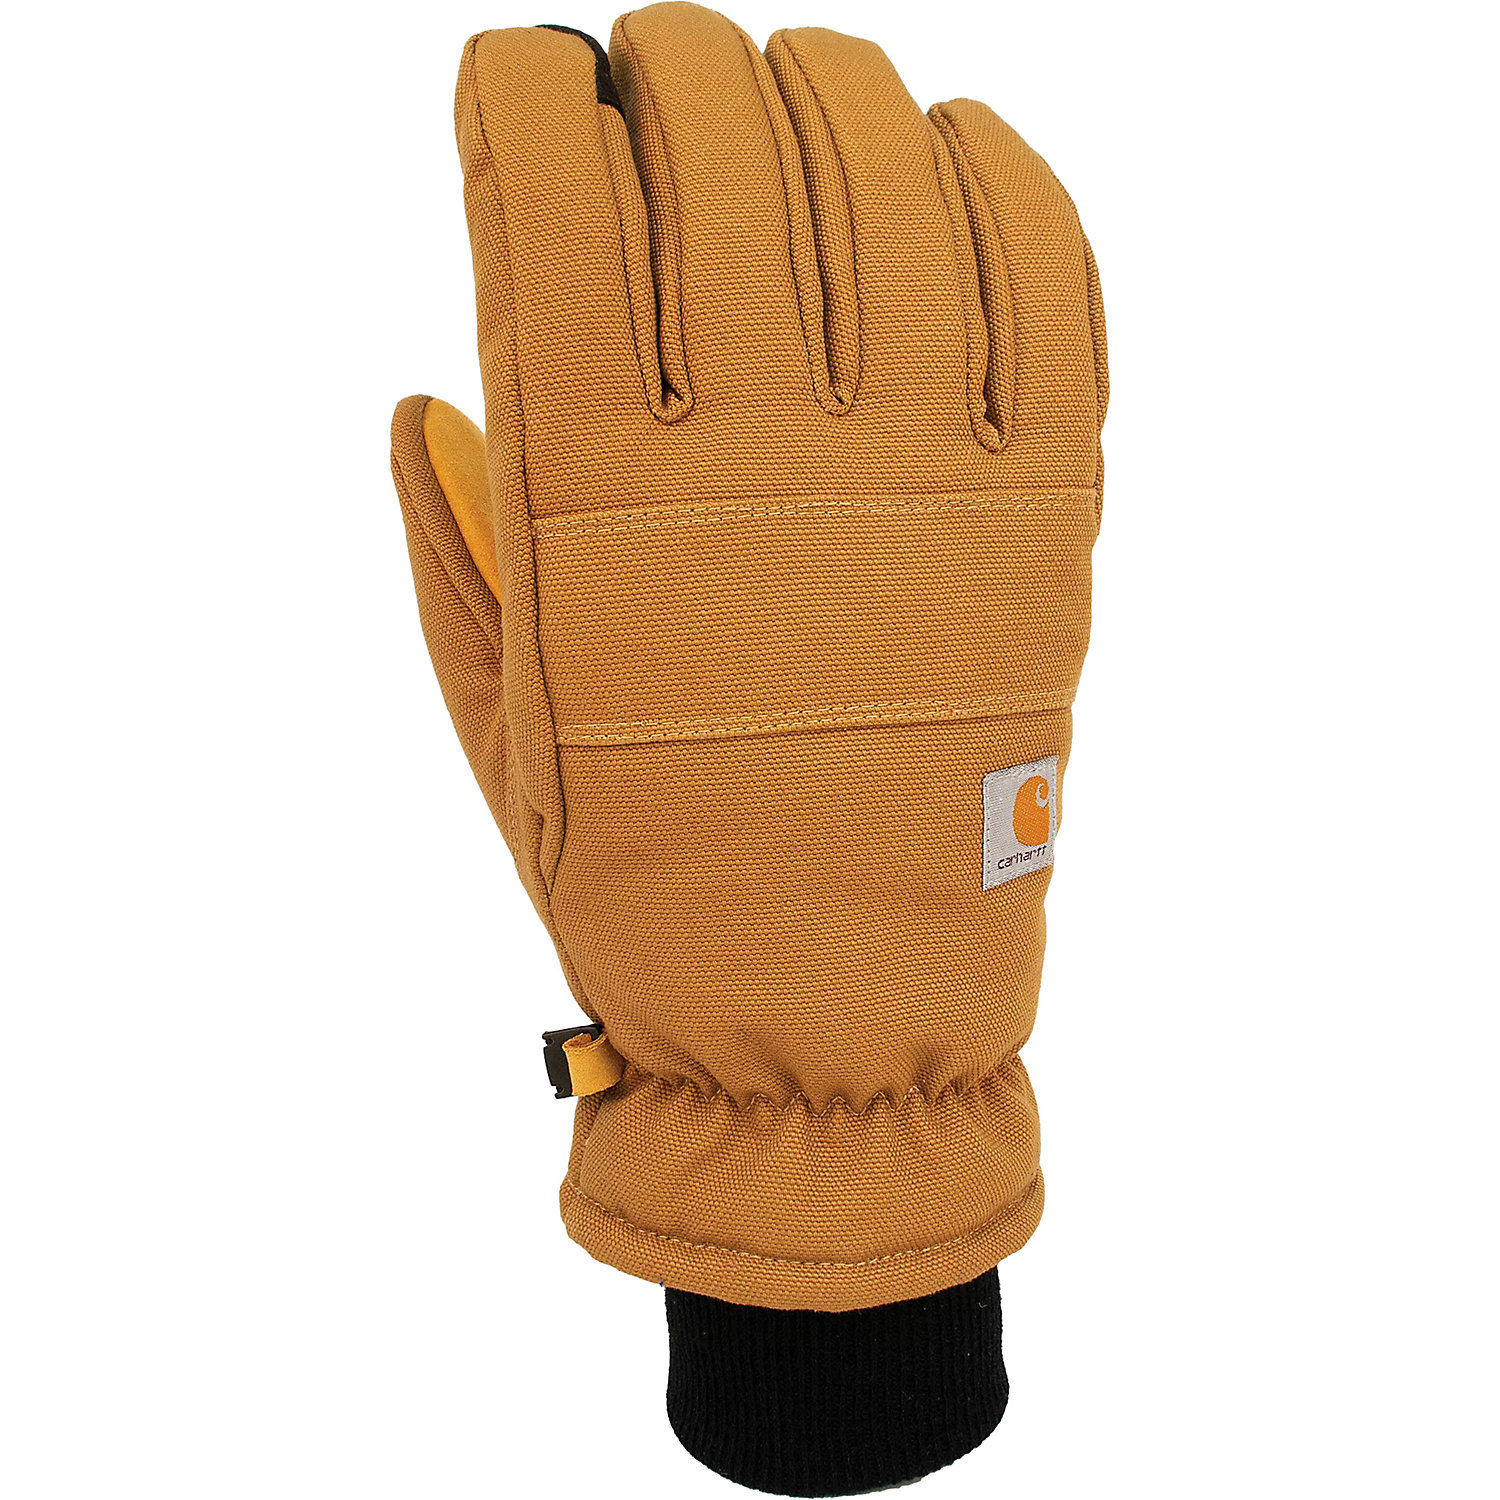 Carhartt Mens Insulated Duck/Synthetic Leather Knit Cuff Glove